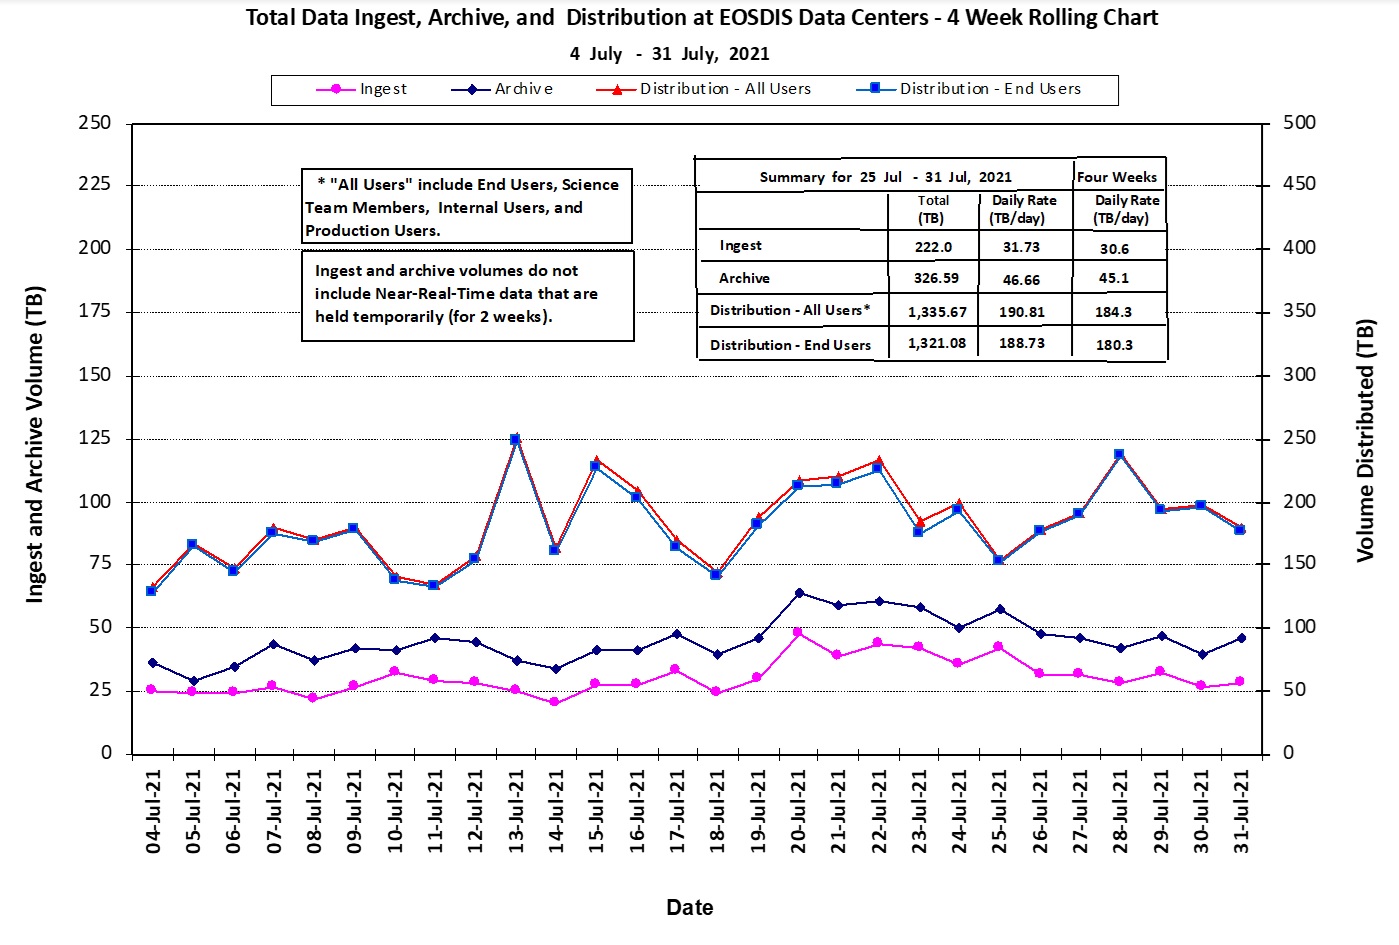 Line graph showing four week rolling chart of ESDIS metrics as of 8-5-21